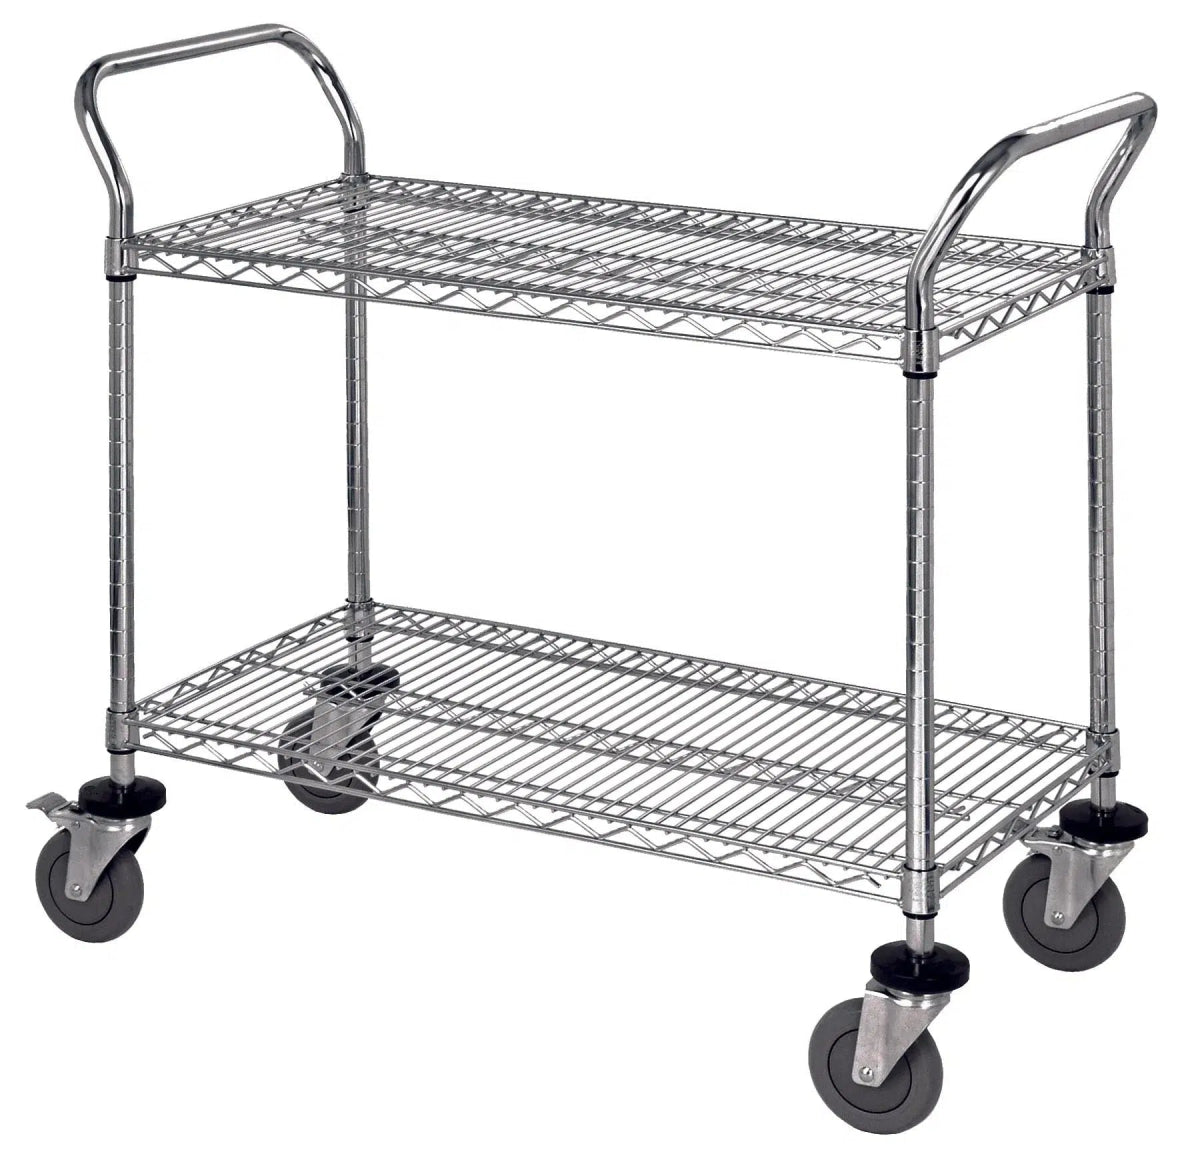 Utility Carts - Industrial 4 Less